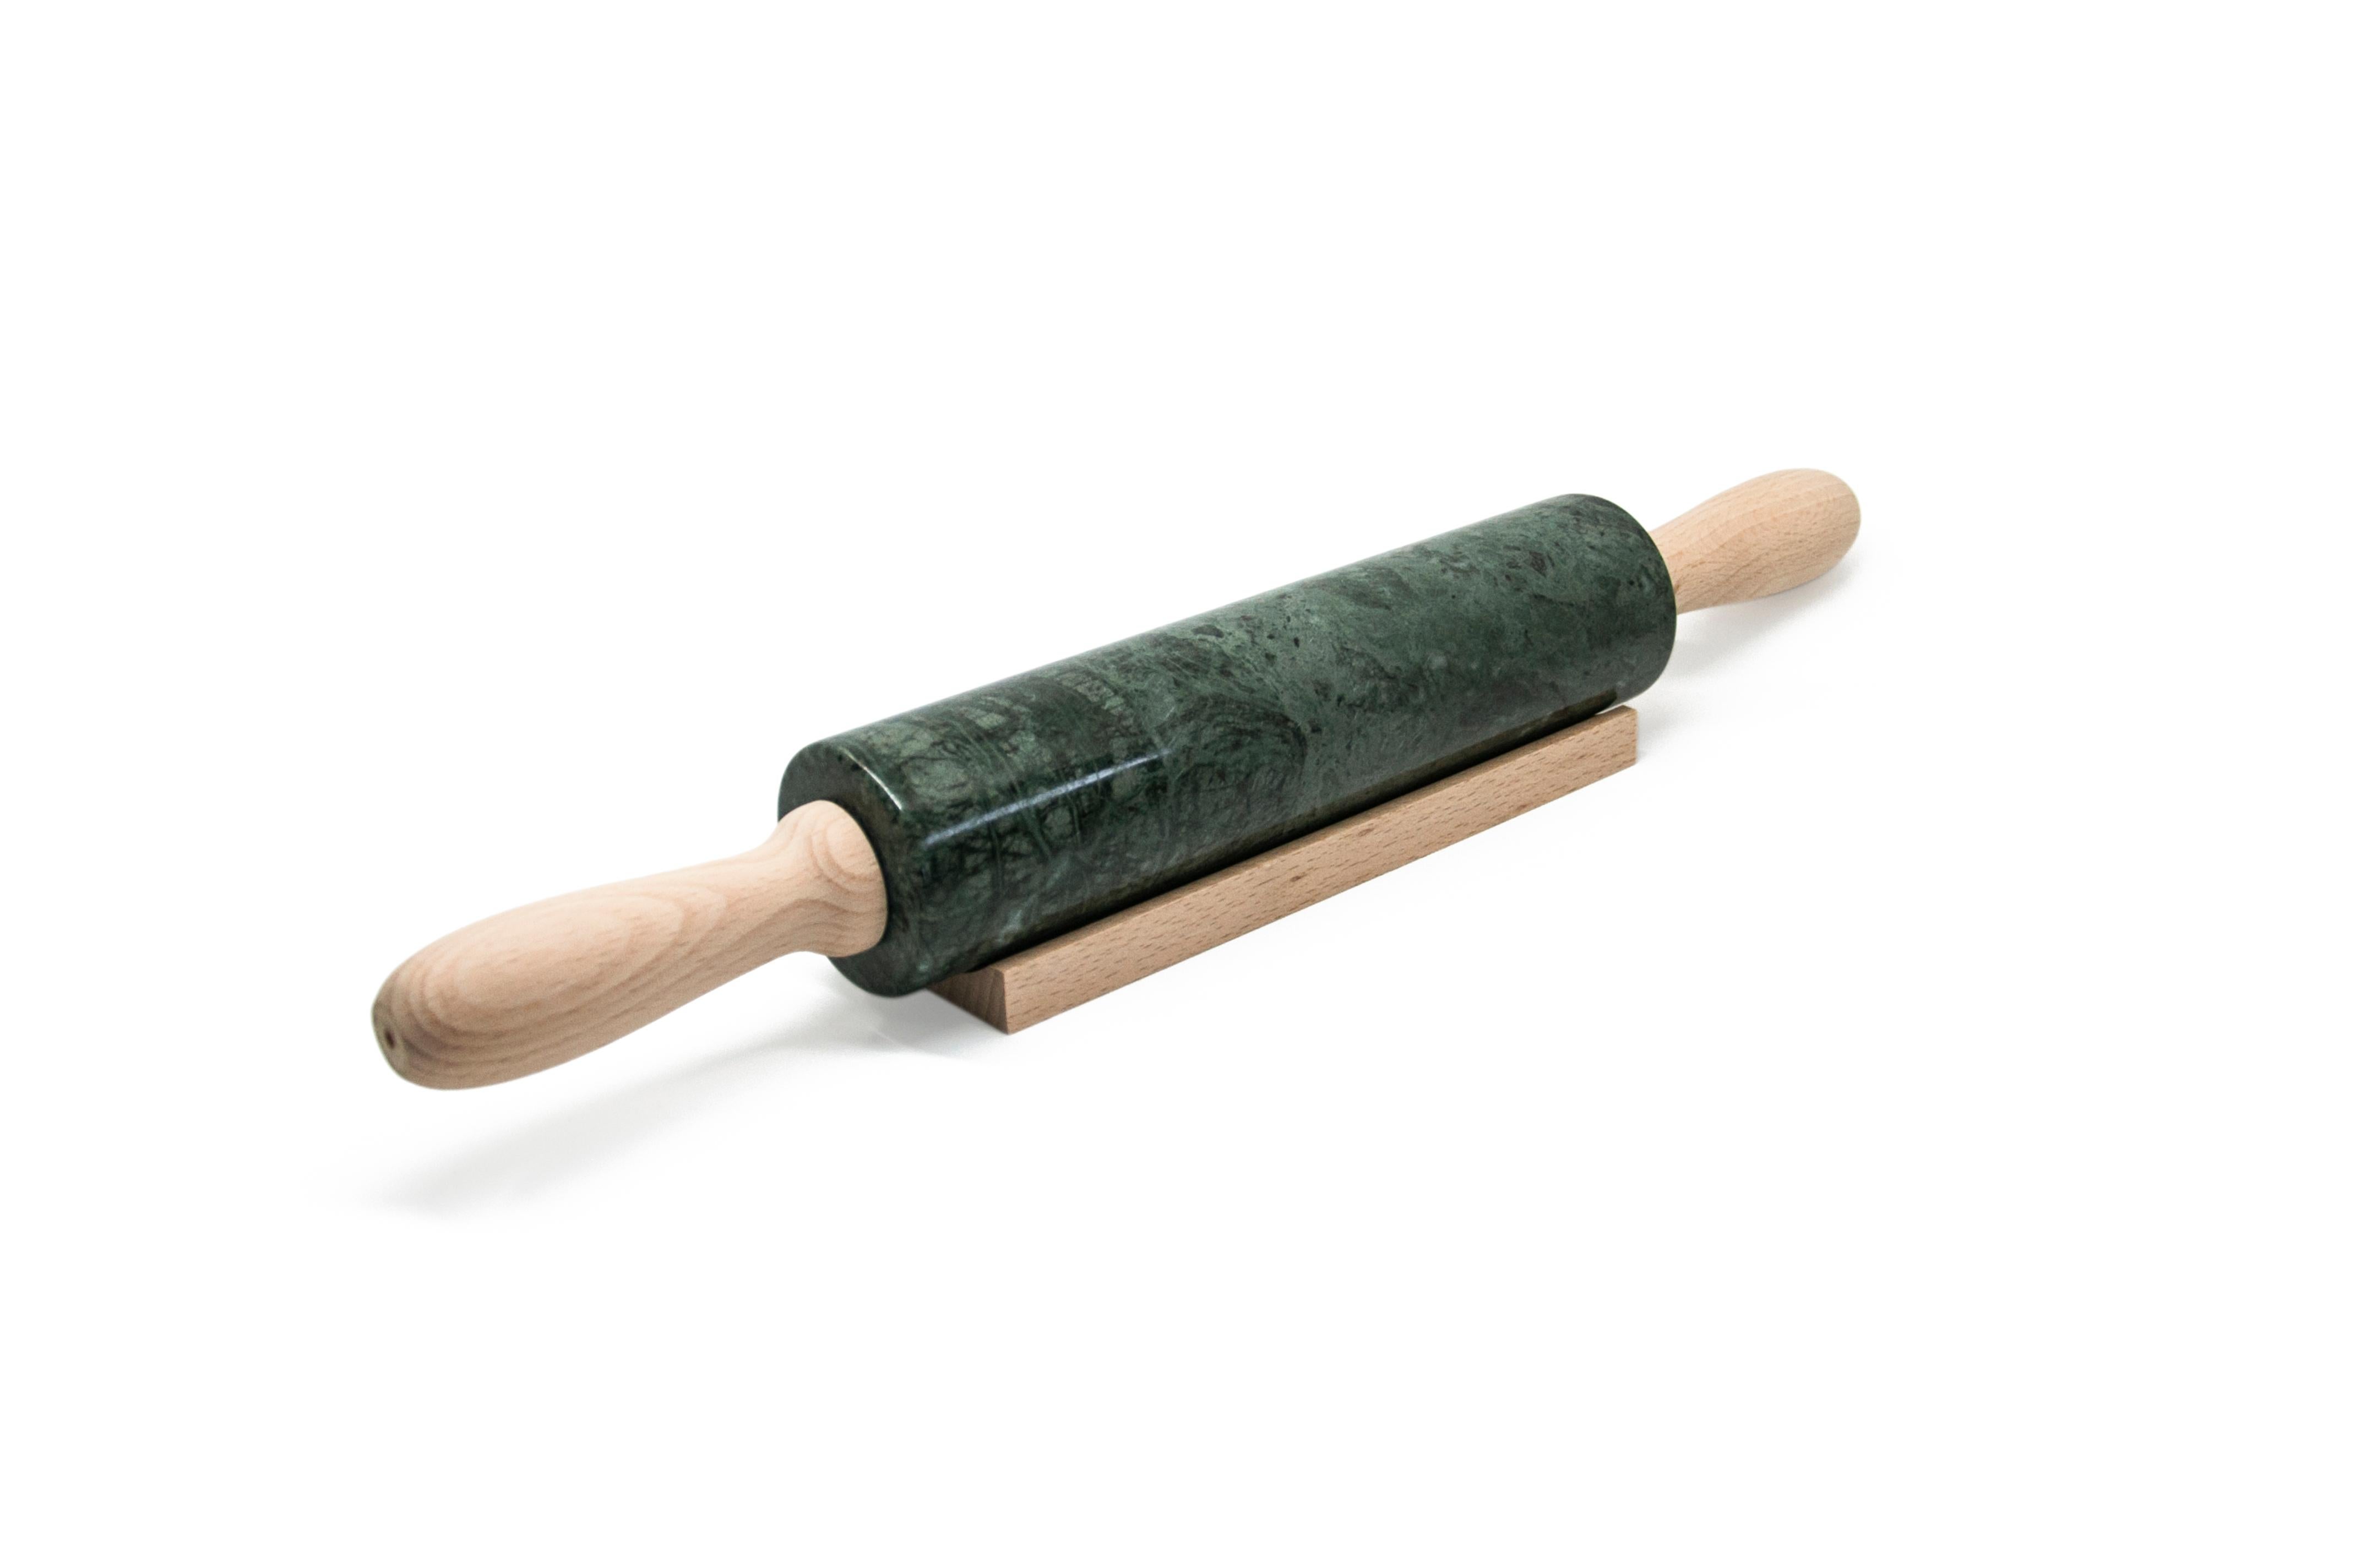 Green Guatemala marble rolling pin with wooden handles. It is assembled manually. Each piece is in a way unique (every marble block is different in veins and shades) and handmade by Italian artisans specialized over generations in processing marble.